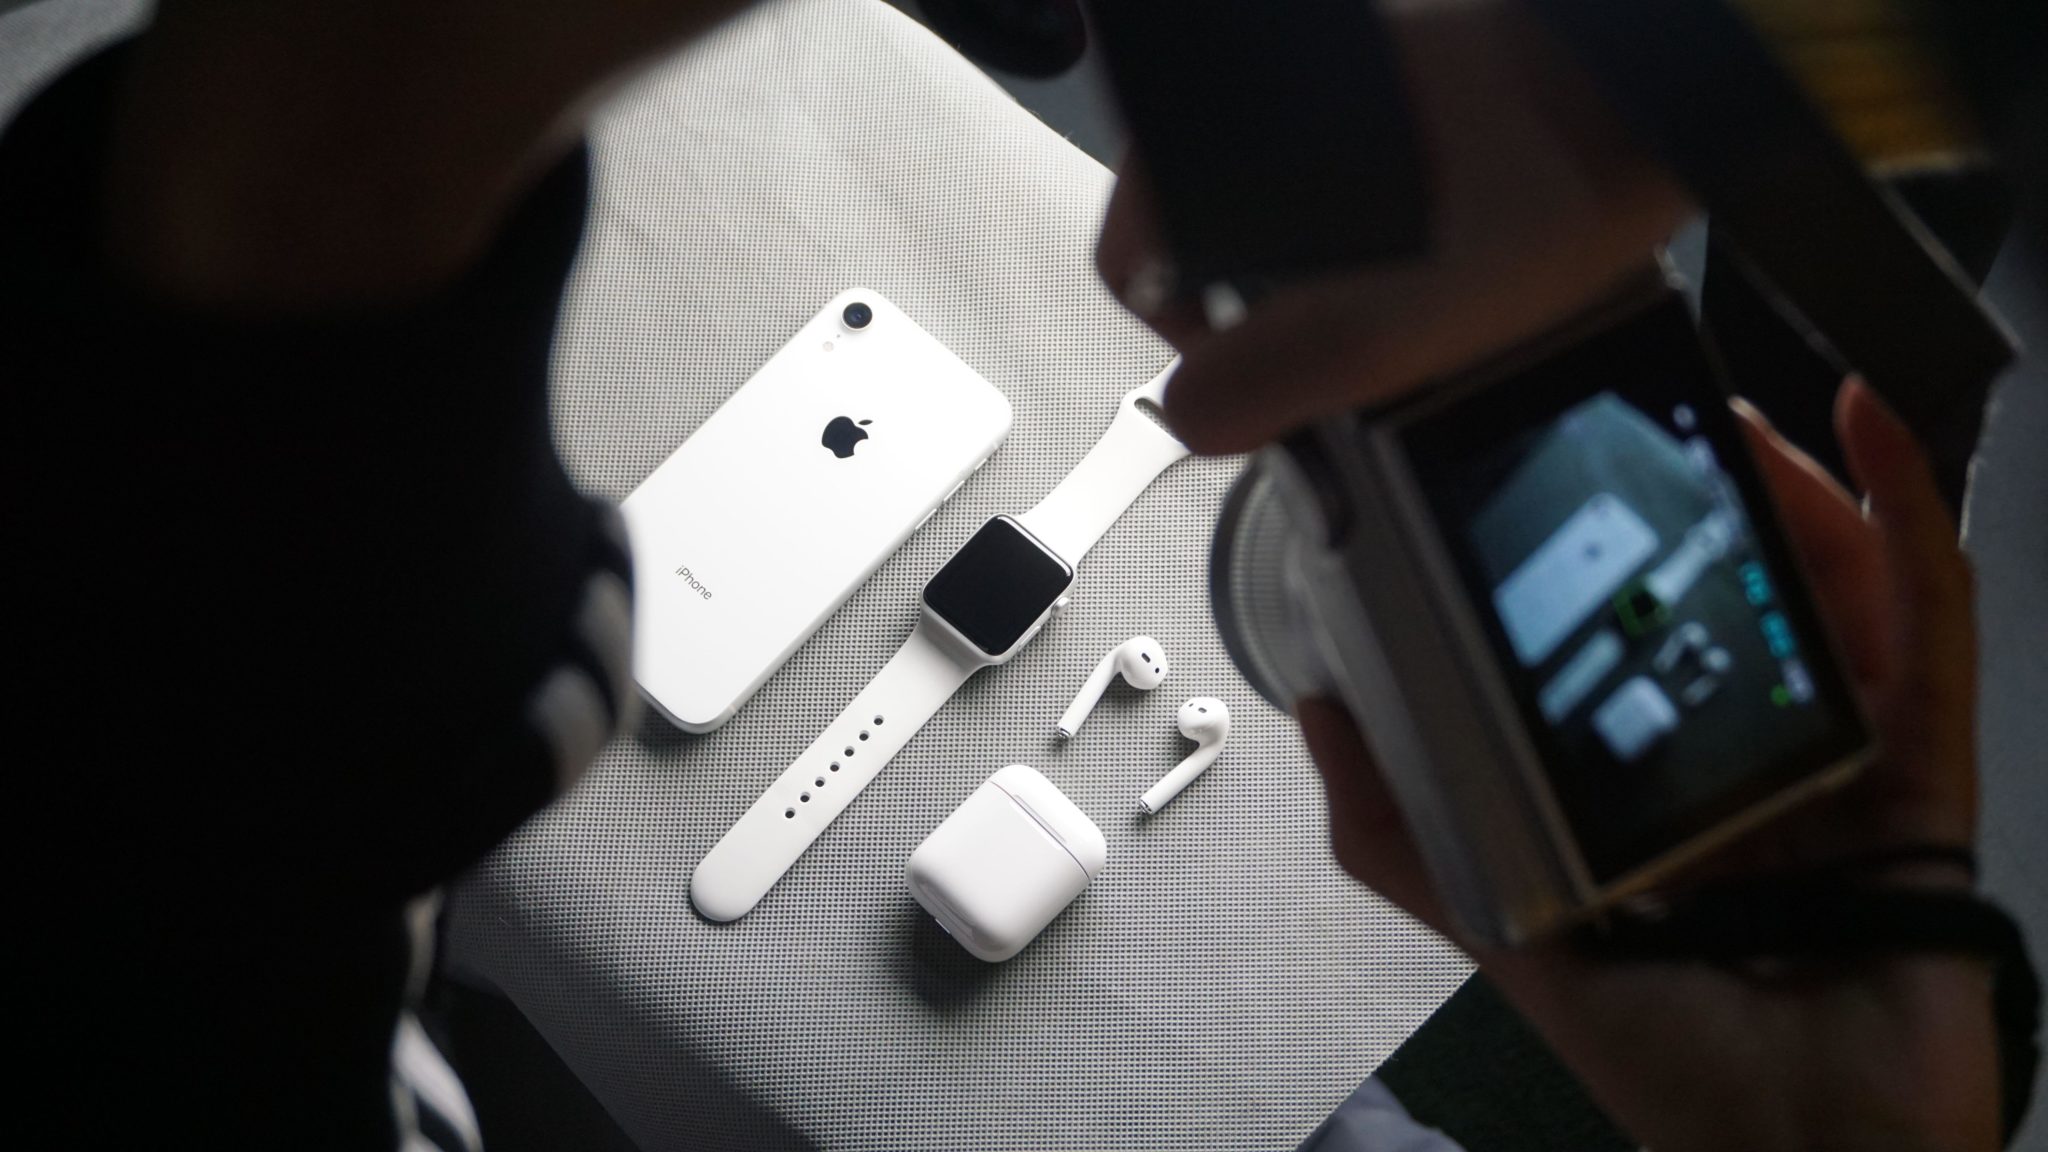 Apple products are seen in Manila, The Philippines in January 2020